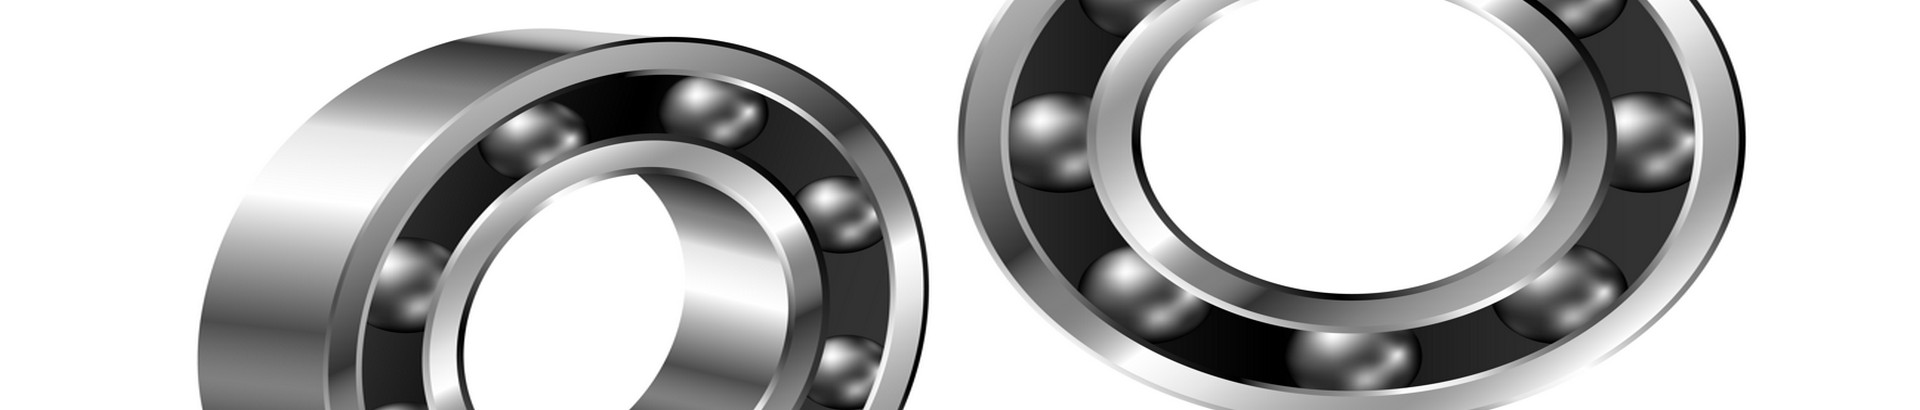 What Are the Types and Uses of Common Bearings? (To be continued...)